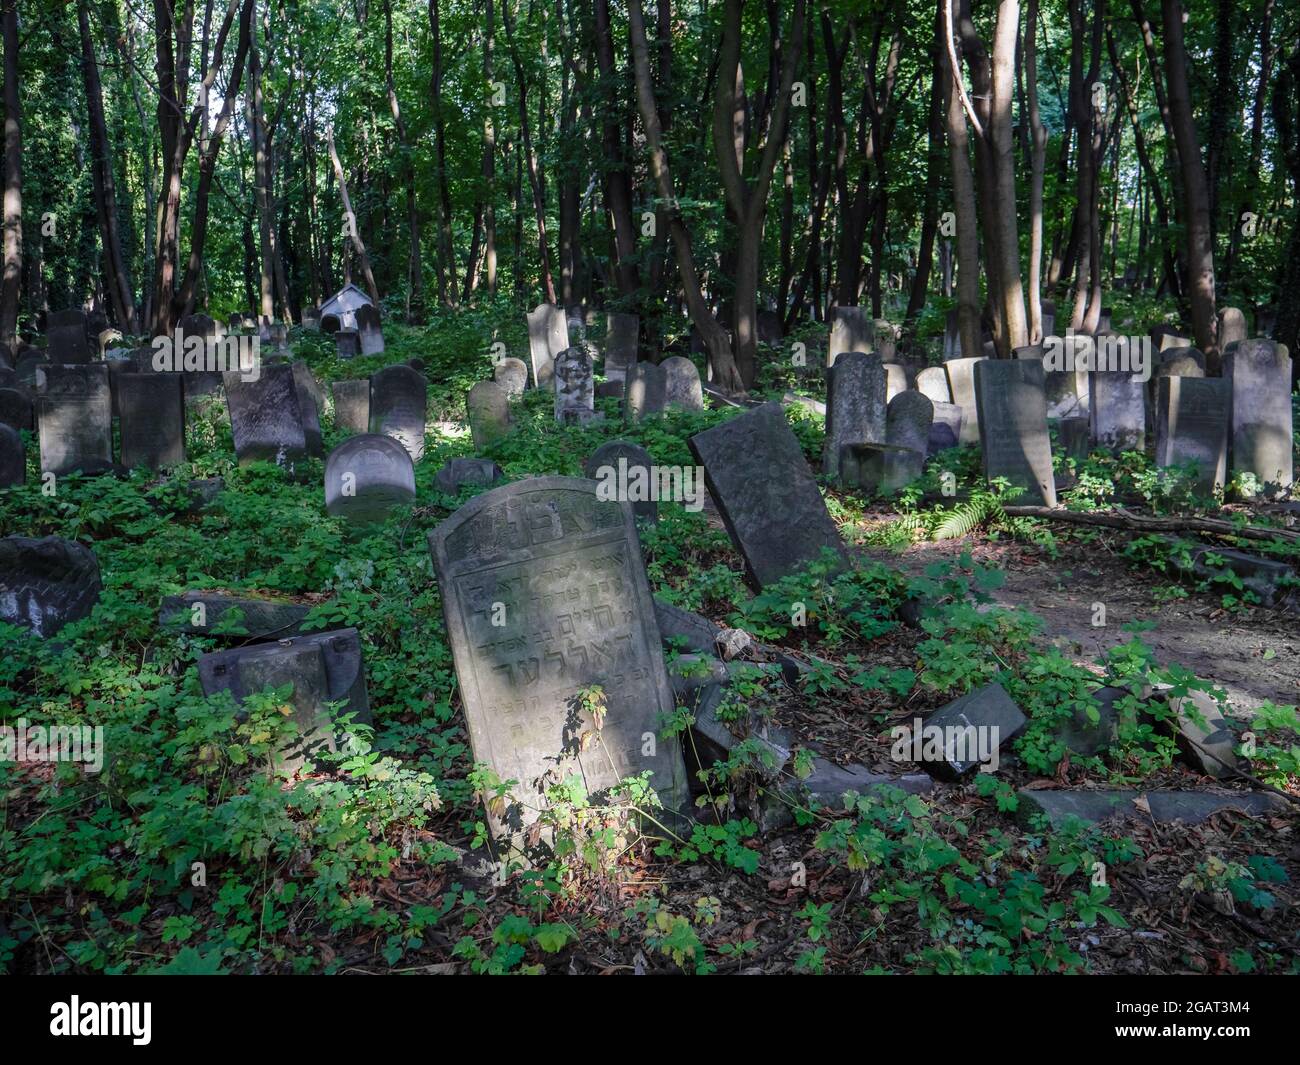 Warsaw, Poland. August 22, 2019. Old, abandoned and destroyed tombs in the Warsaw Jewish Cemetery (Cmentarz Zydowki) Stock Photo